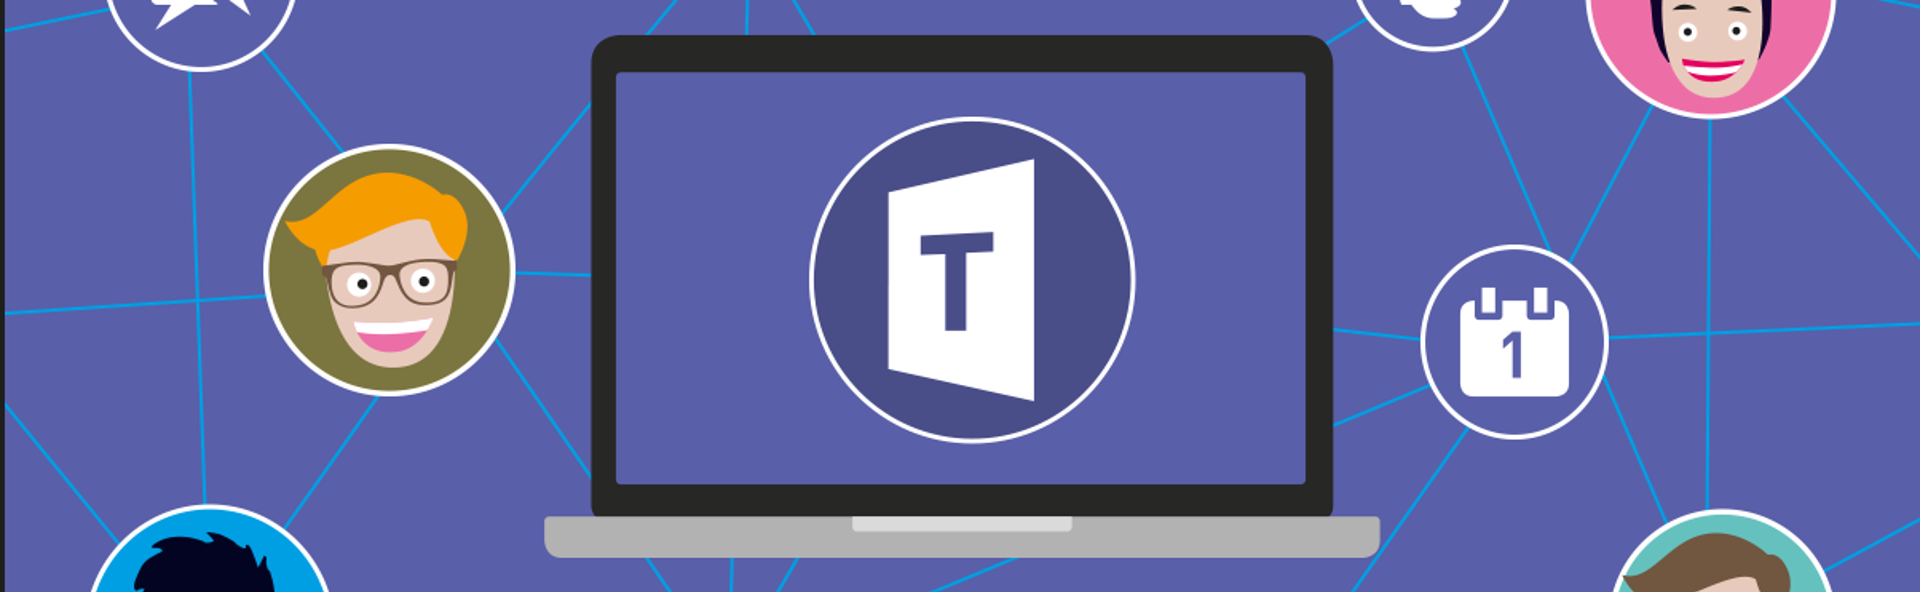 The benefits of a unified communications platform - Microsoft Teams